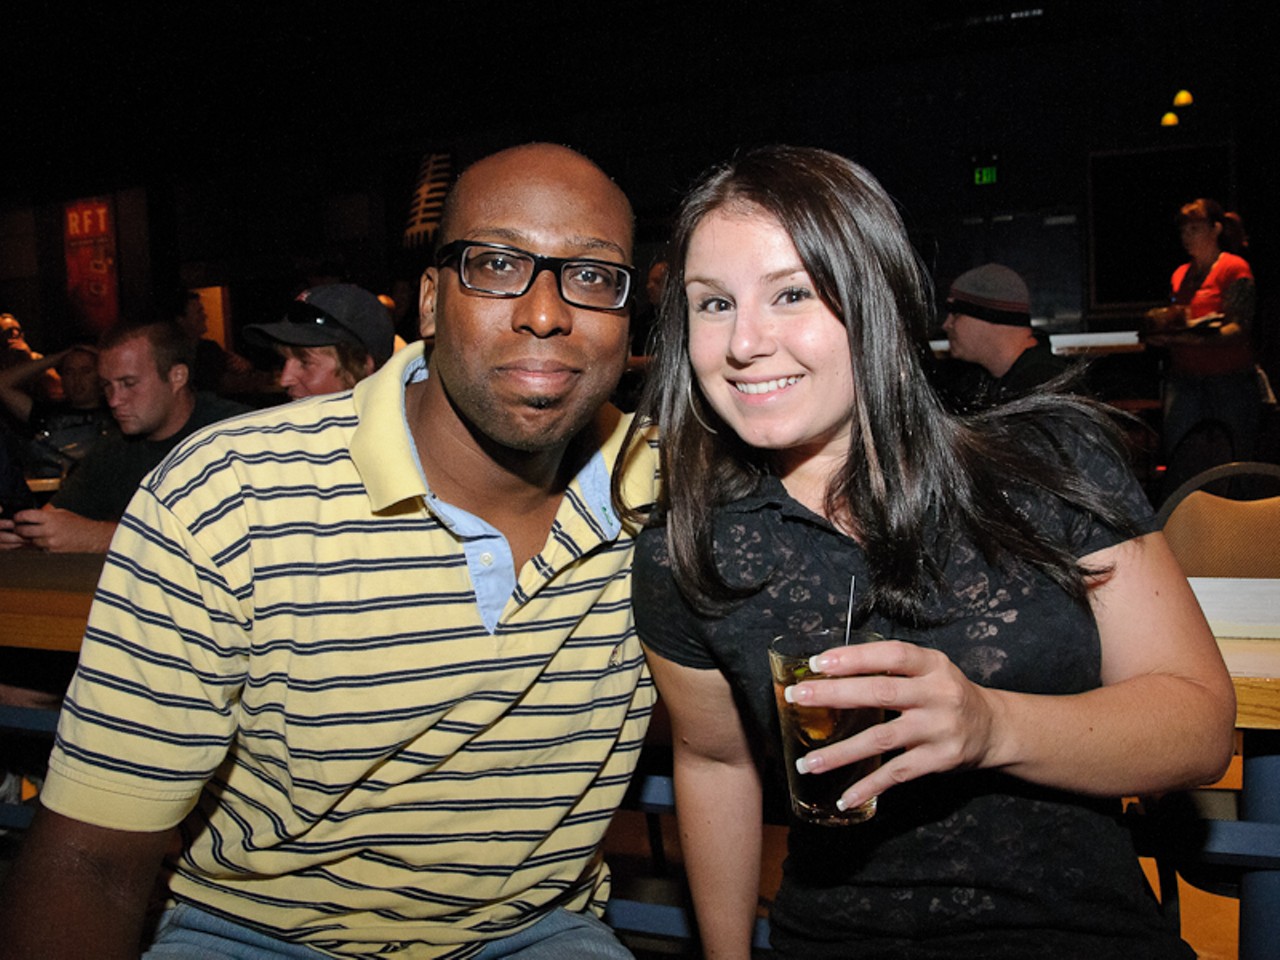 Rob and Melody of Saint Louis came out to see "the originators of West Coast hip-hop."